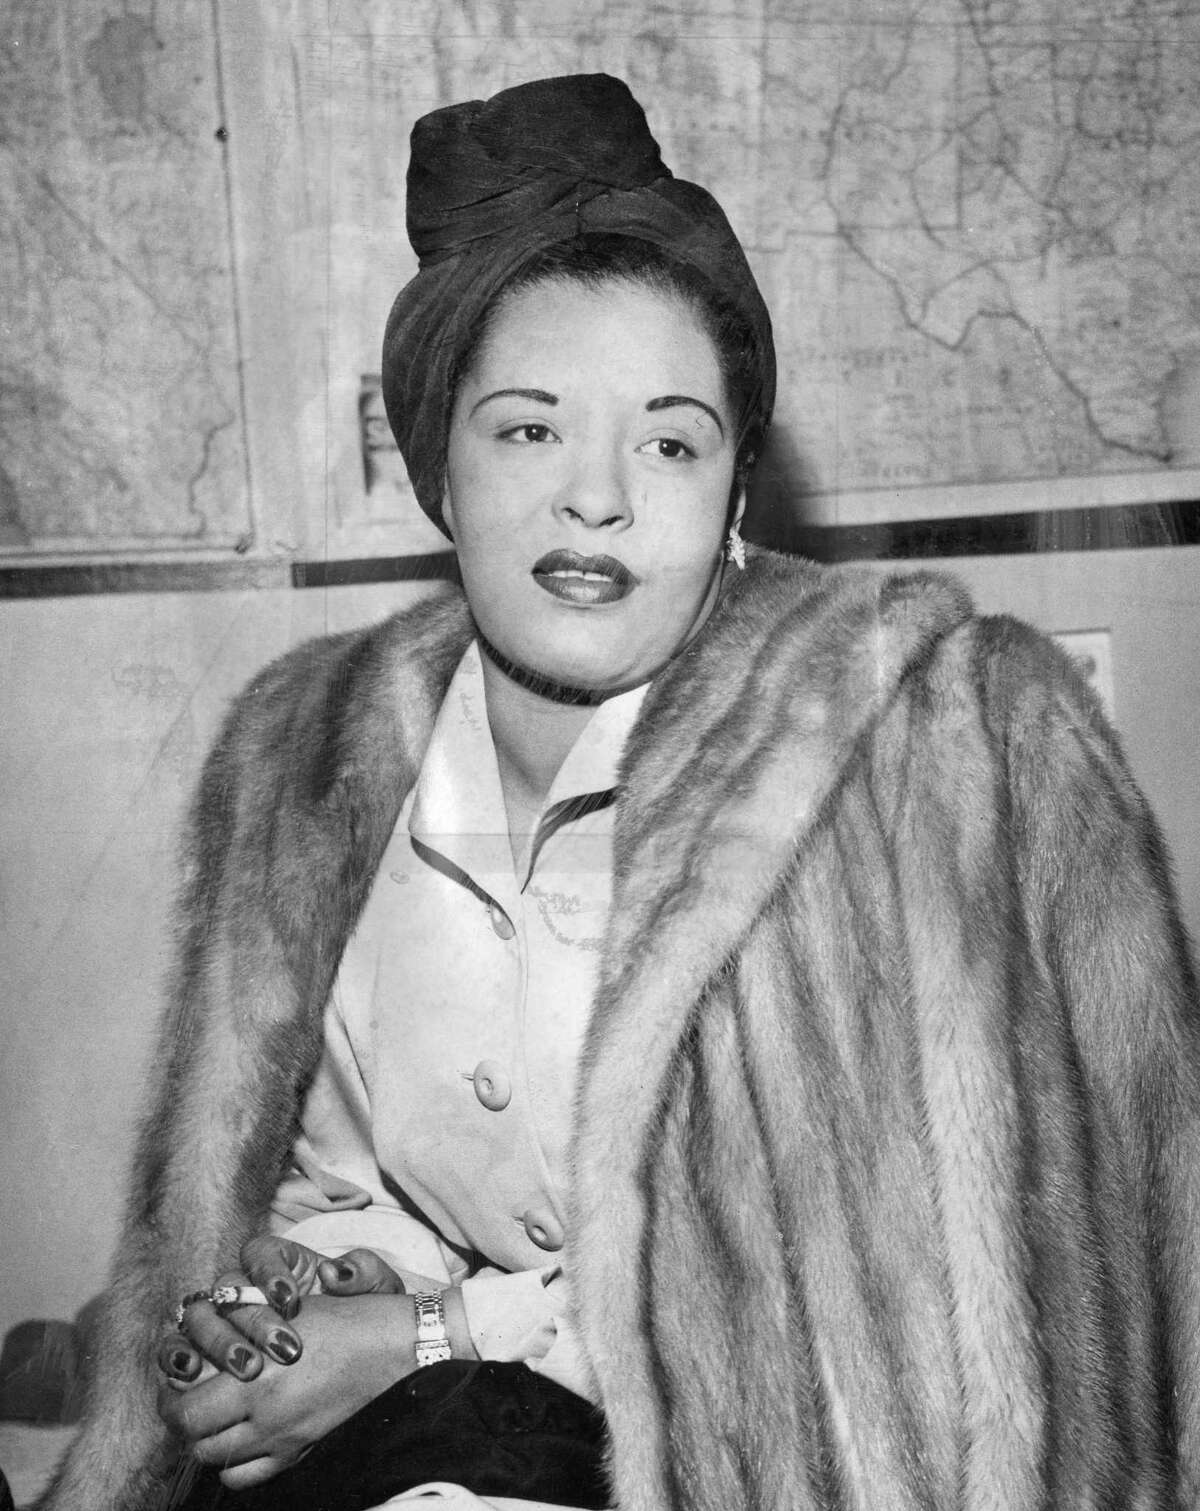 Singer Billie Holiday in 1949. Her recording of the song “Strange Fruit” will be featured in a talk on jazz and civil rights at Wilton Library on Sunday, Jan. 26.